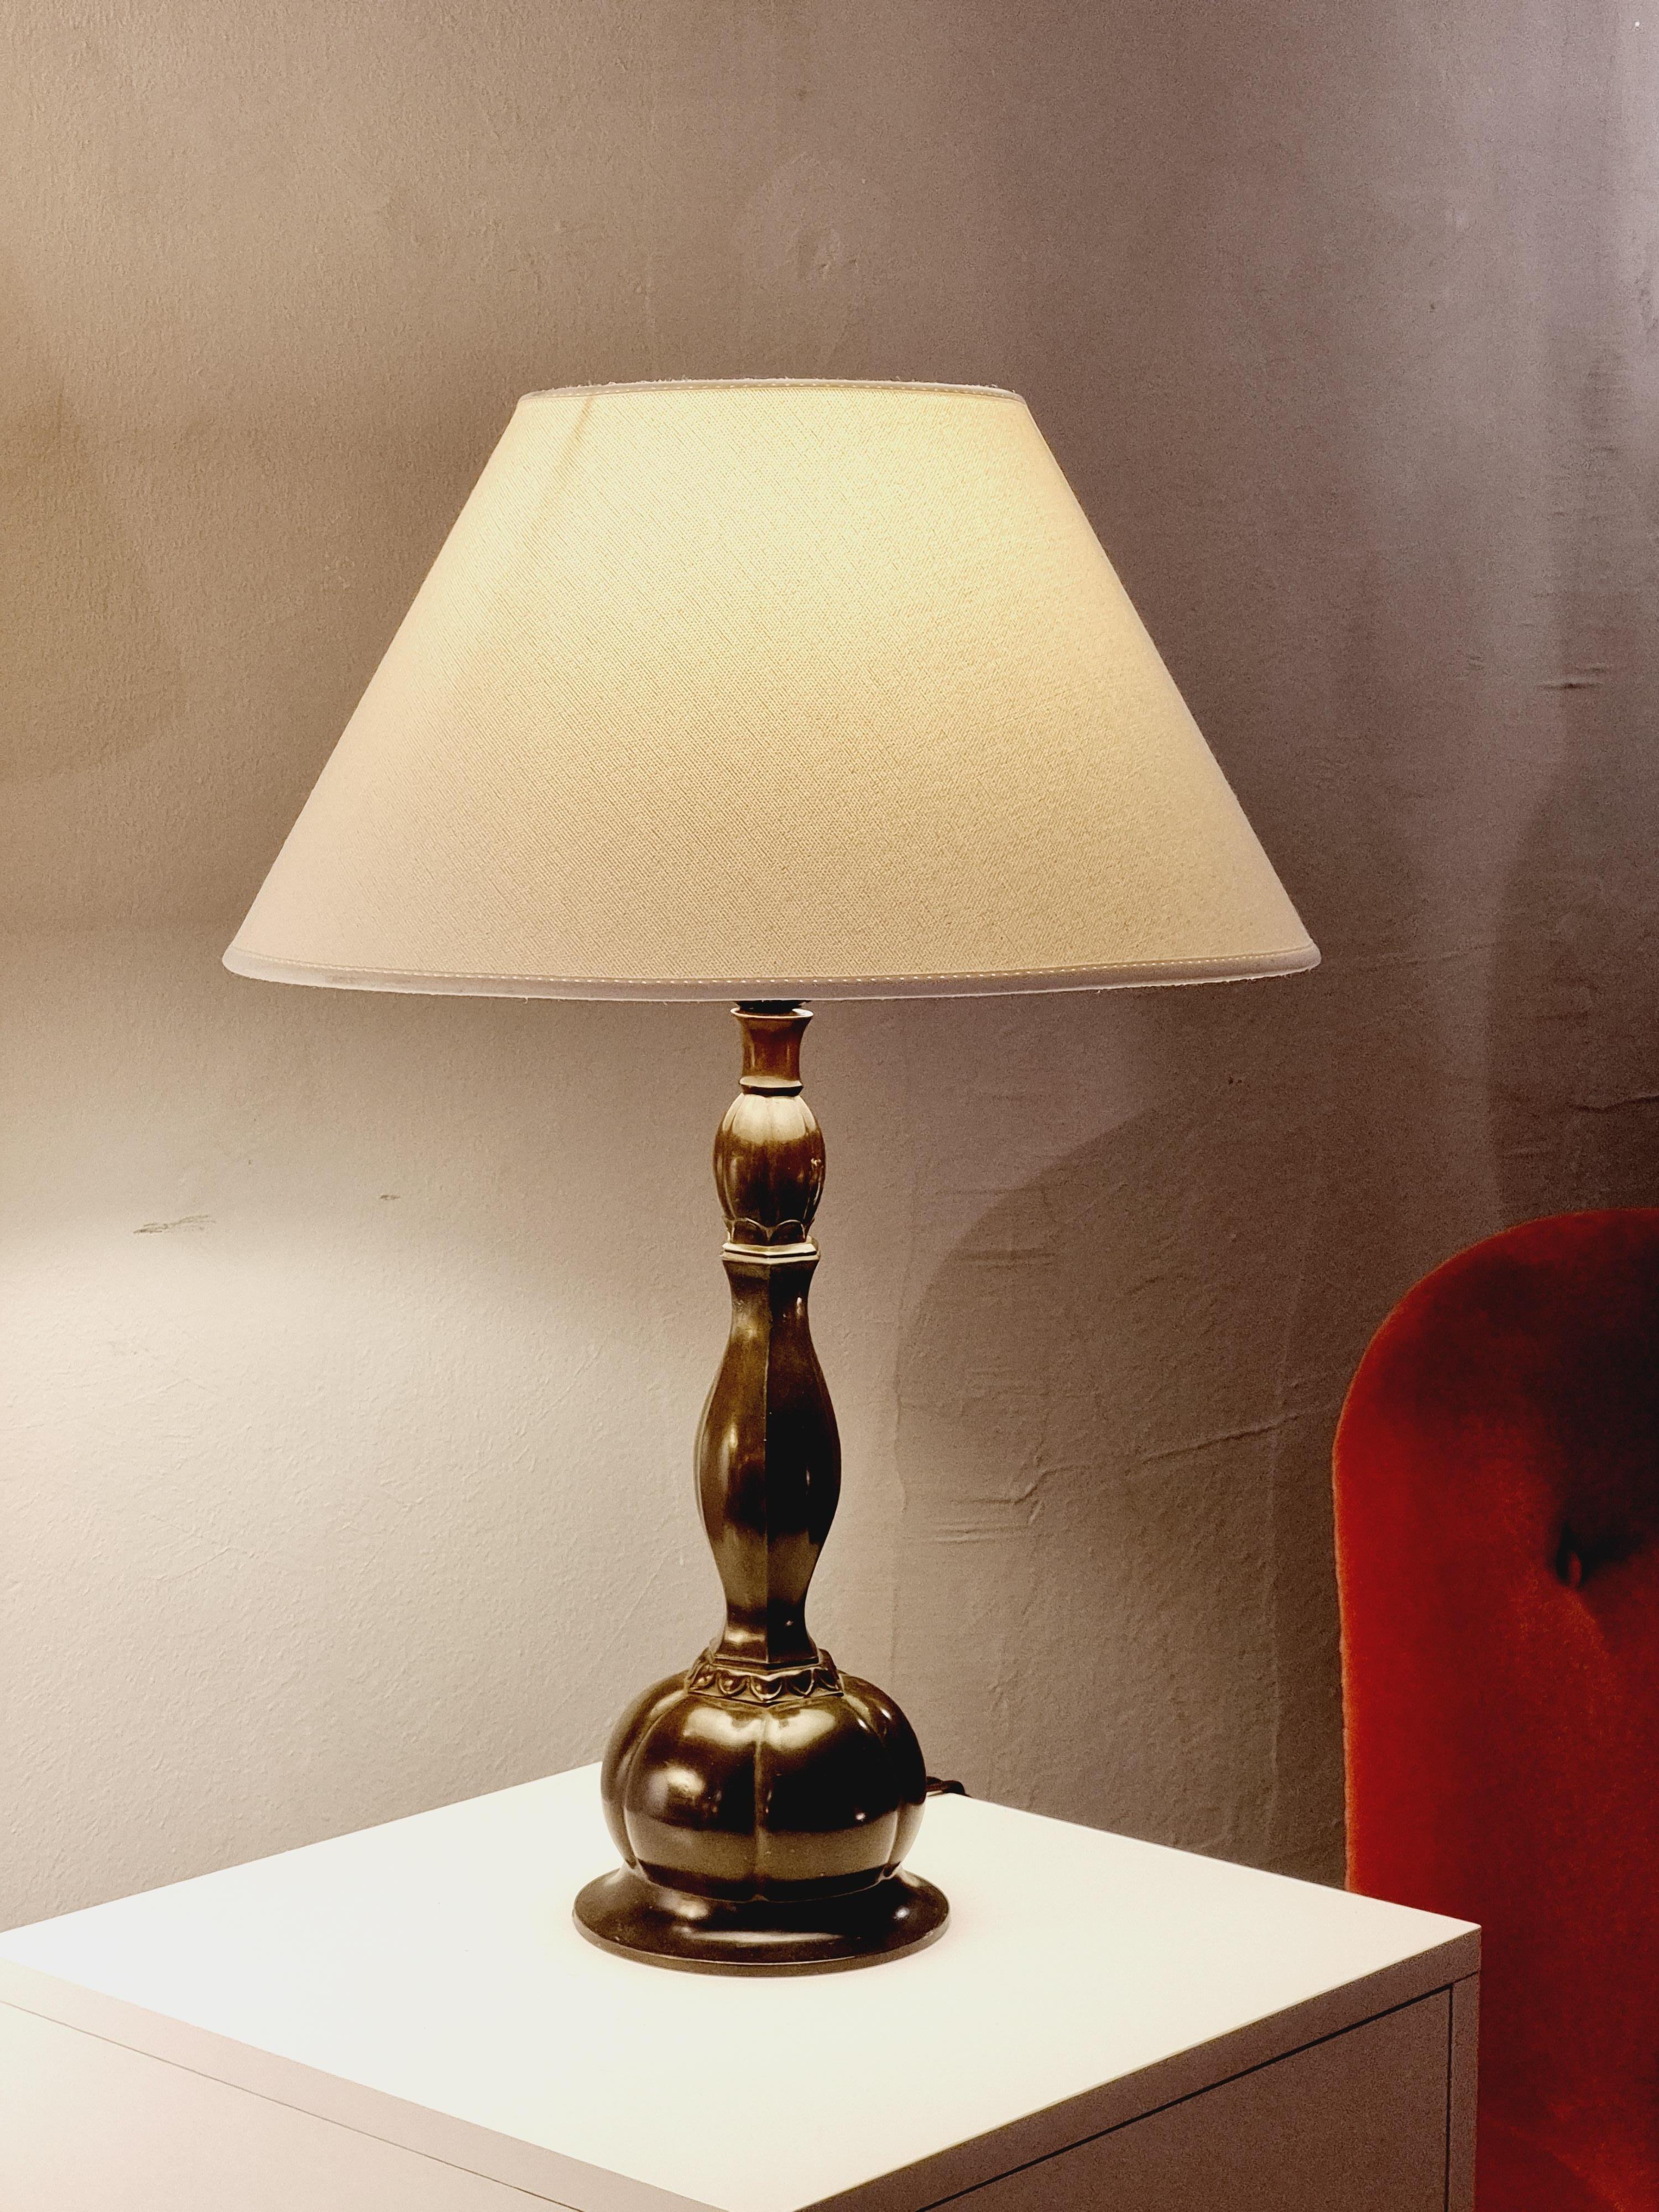 Table lamp by the danish master of bronze and inventor of the so called Discometal Just Andersen. This rare model in discometal has beautiful, soft shapes typical of Scandinavian 1930s / Art Deco. 

It has smaller signs of age and wear, a few